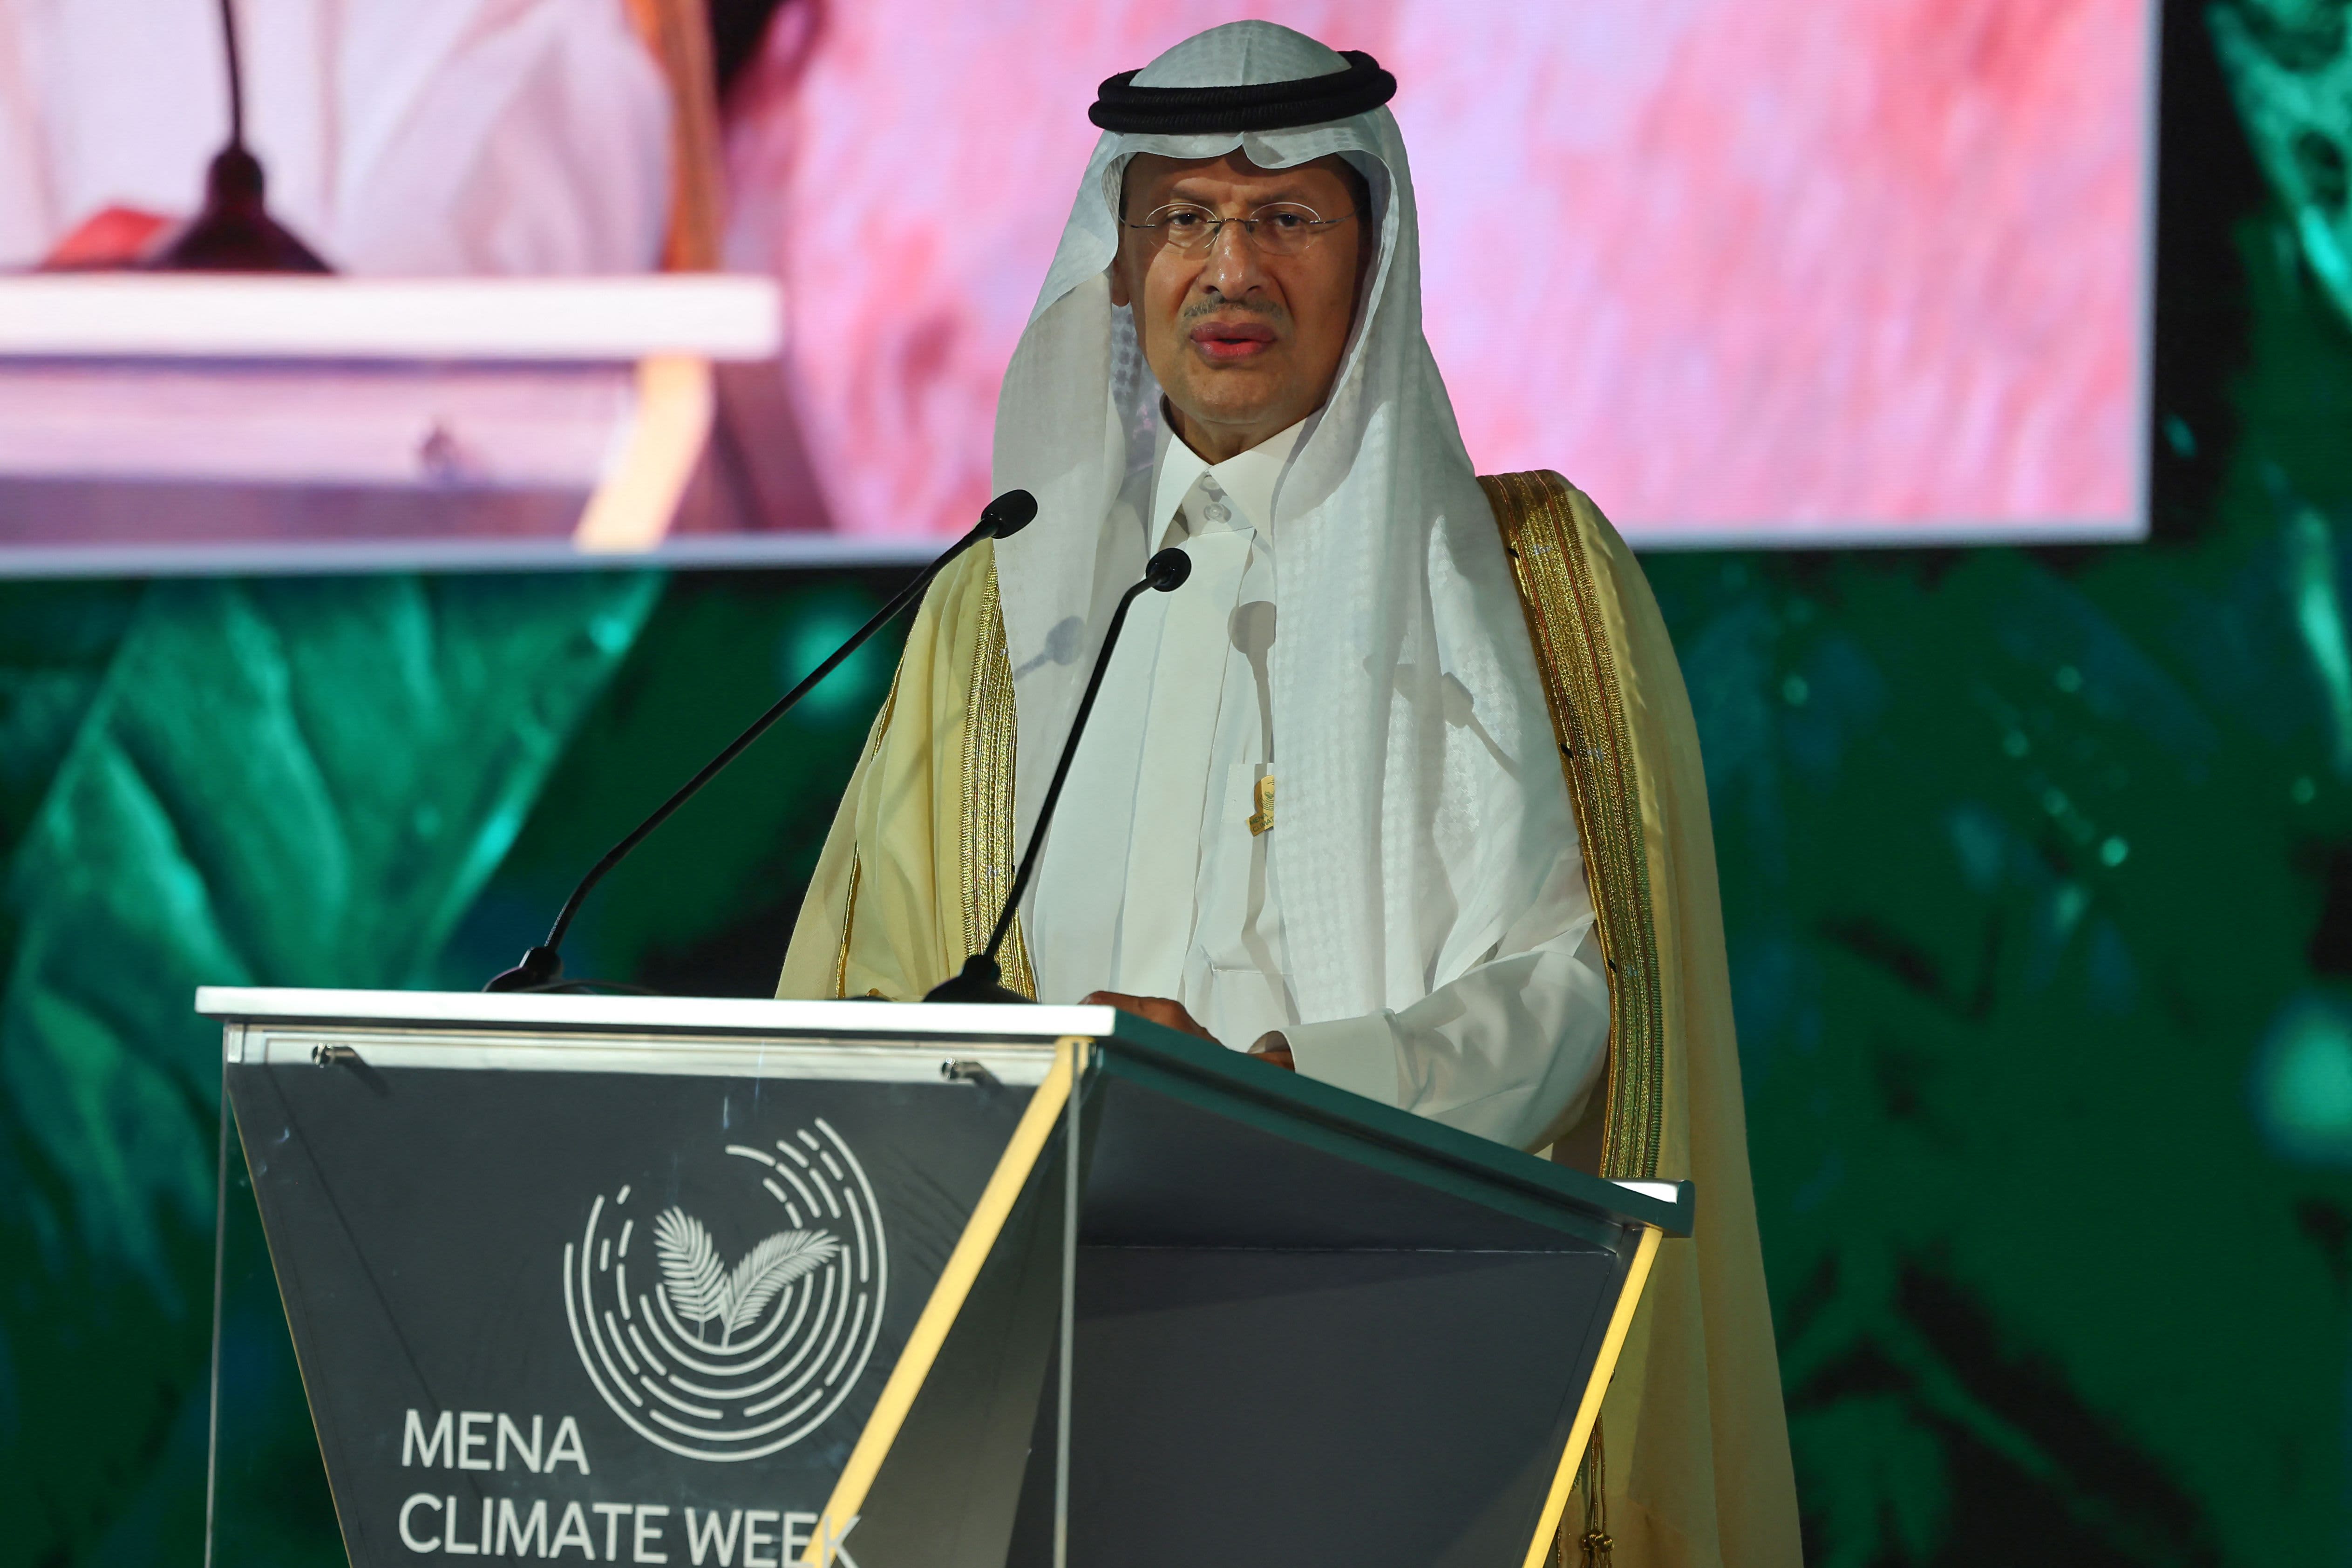 ‘I would not forfeit the precautionary approach’ to oil production policy, Saudi energy minister says